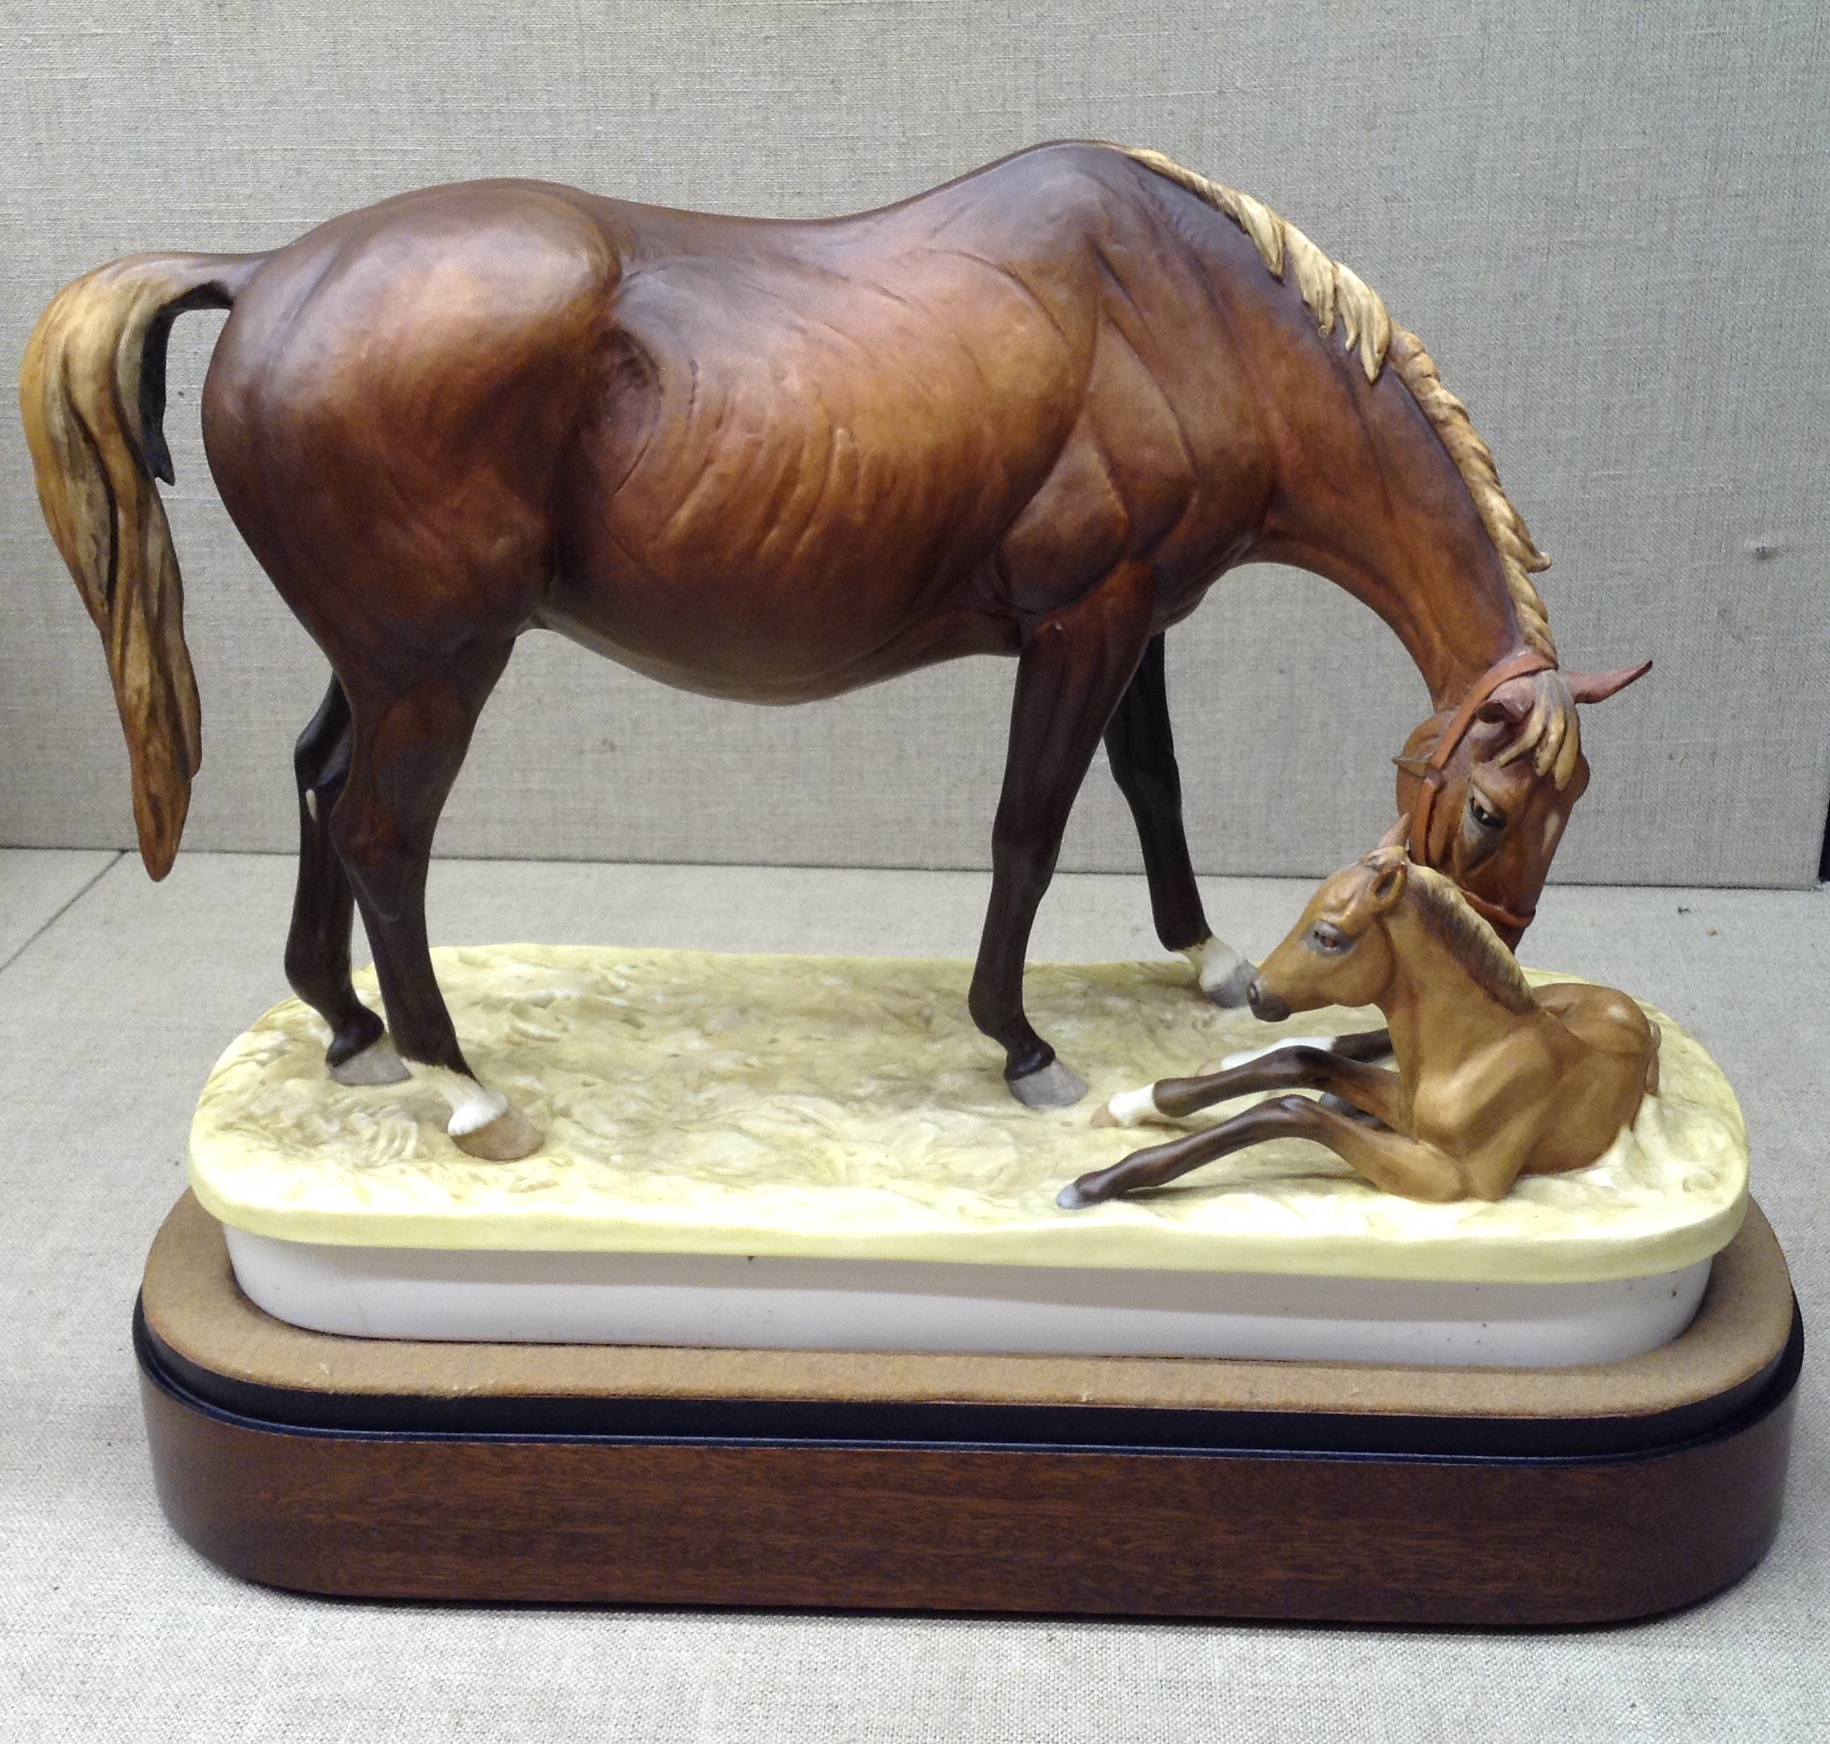 DORIS LINDNER, A ROYAL WORCESTER HORSE Titled 'The New Born ', limited edition 166/500, complete